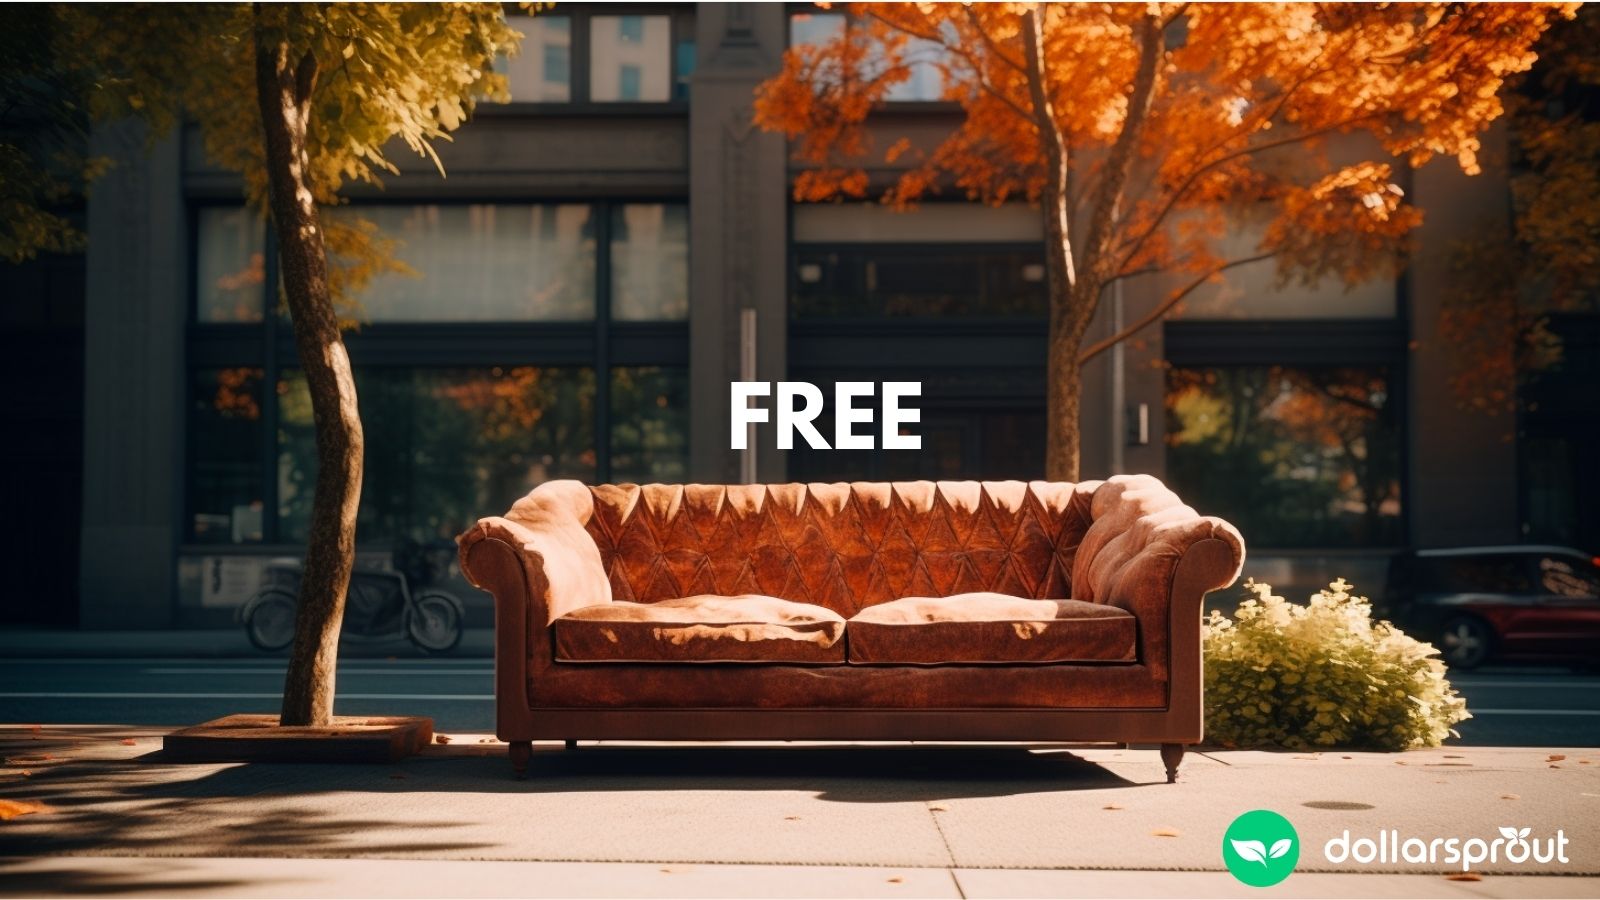 Discover furniture with free samples